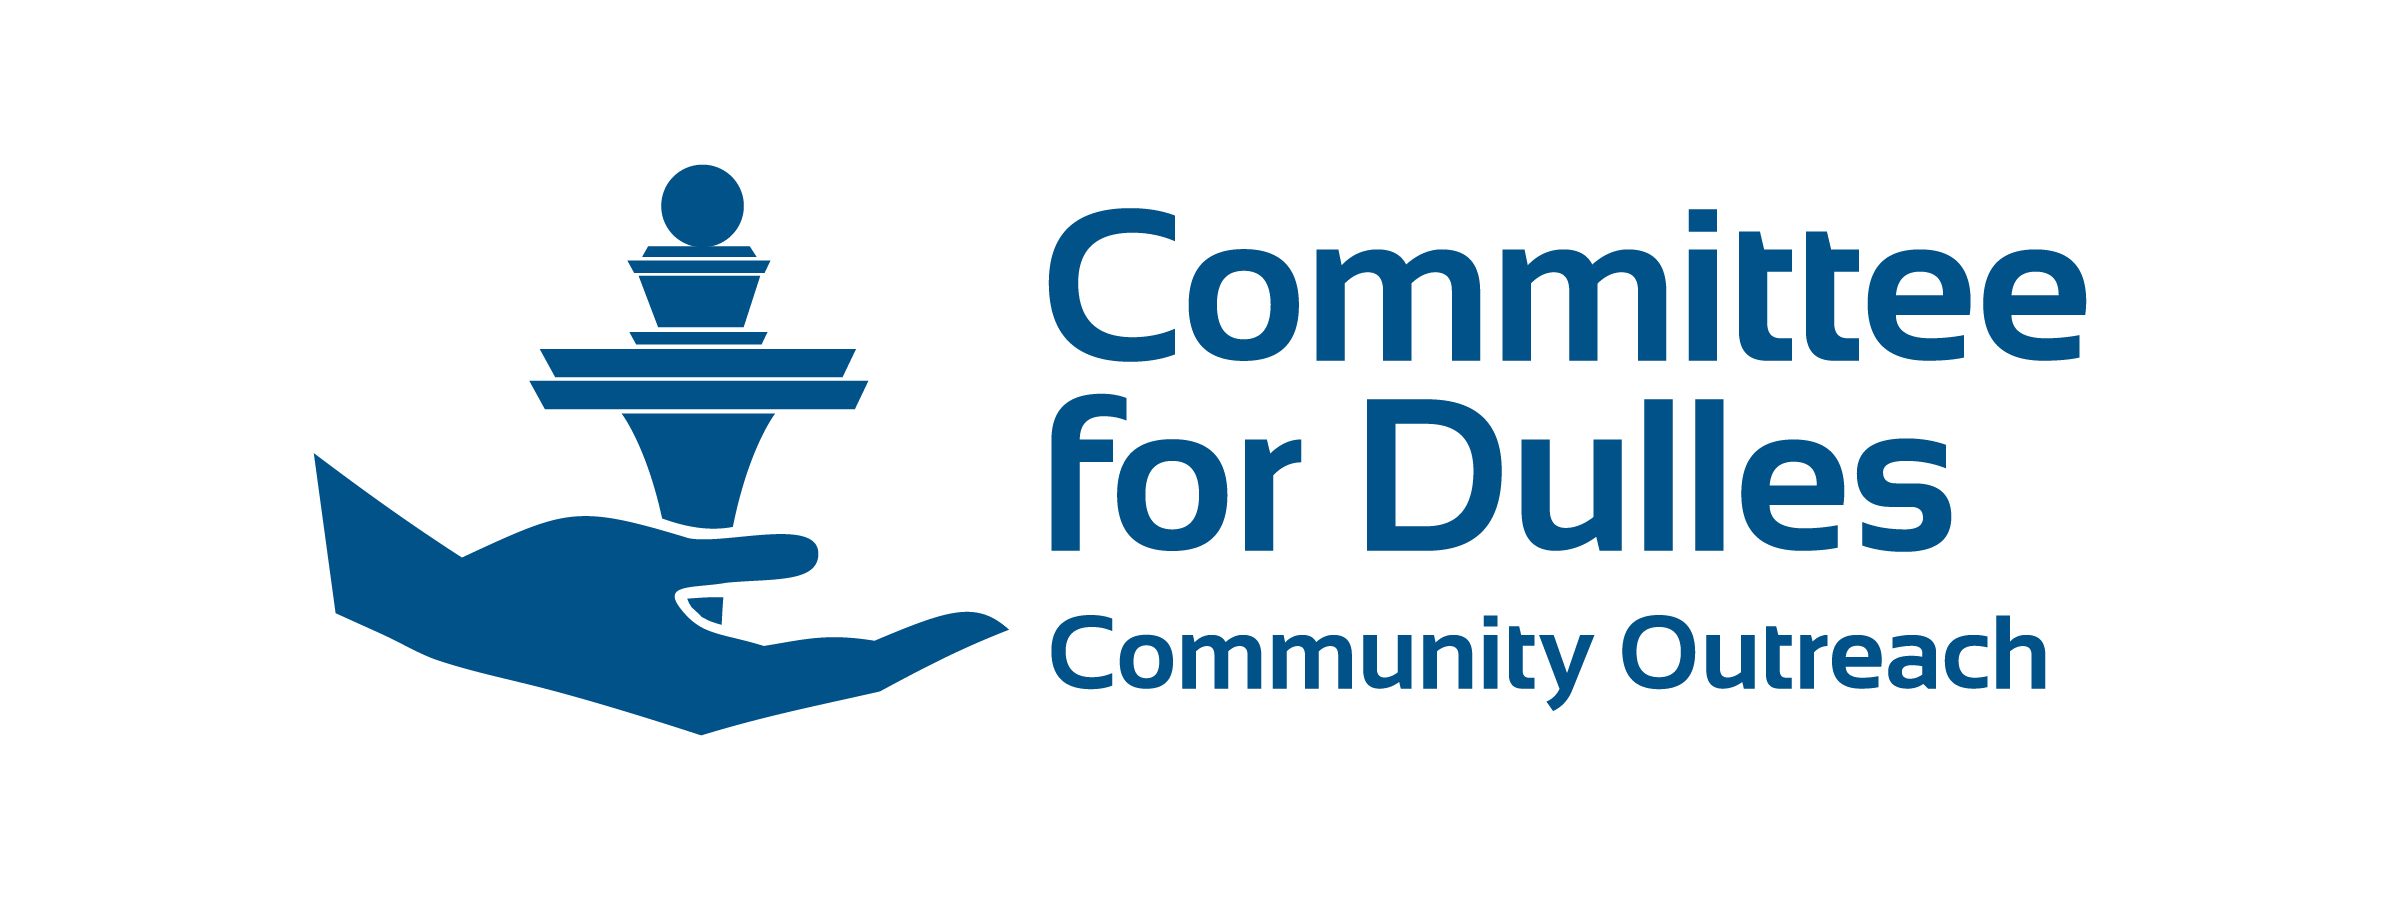 committee-for-dulles-community-outreach.square.site